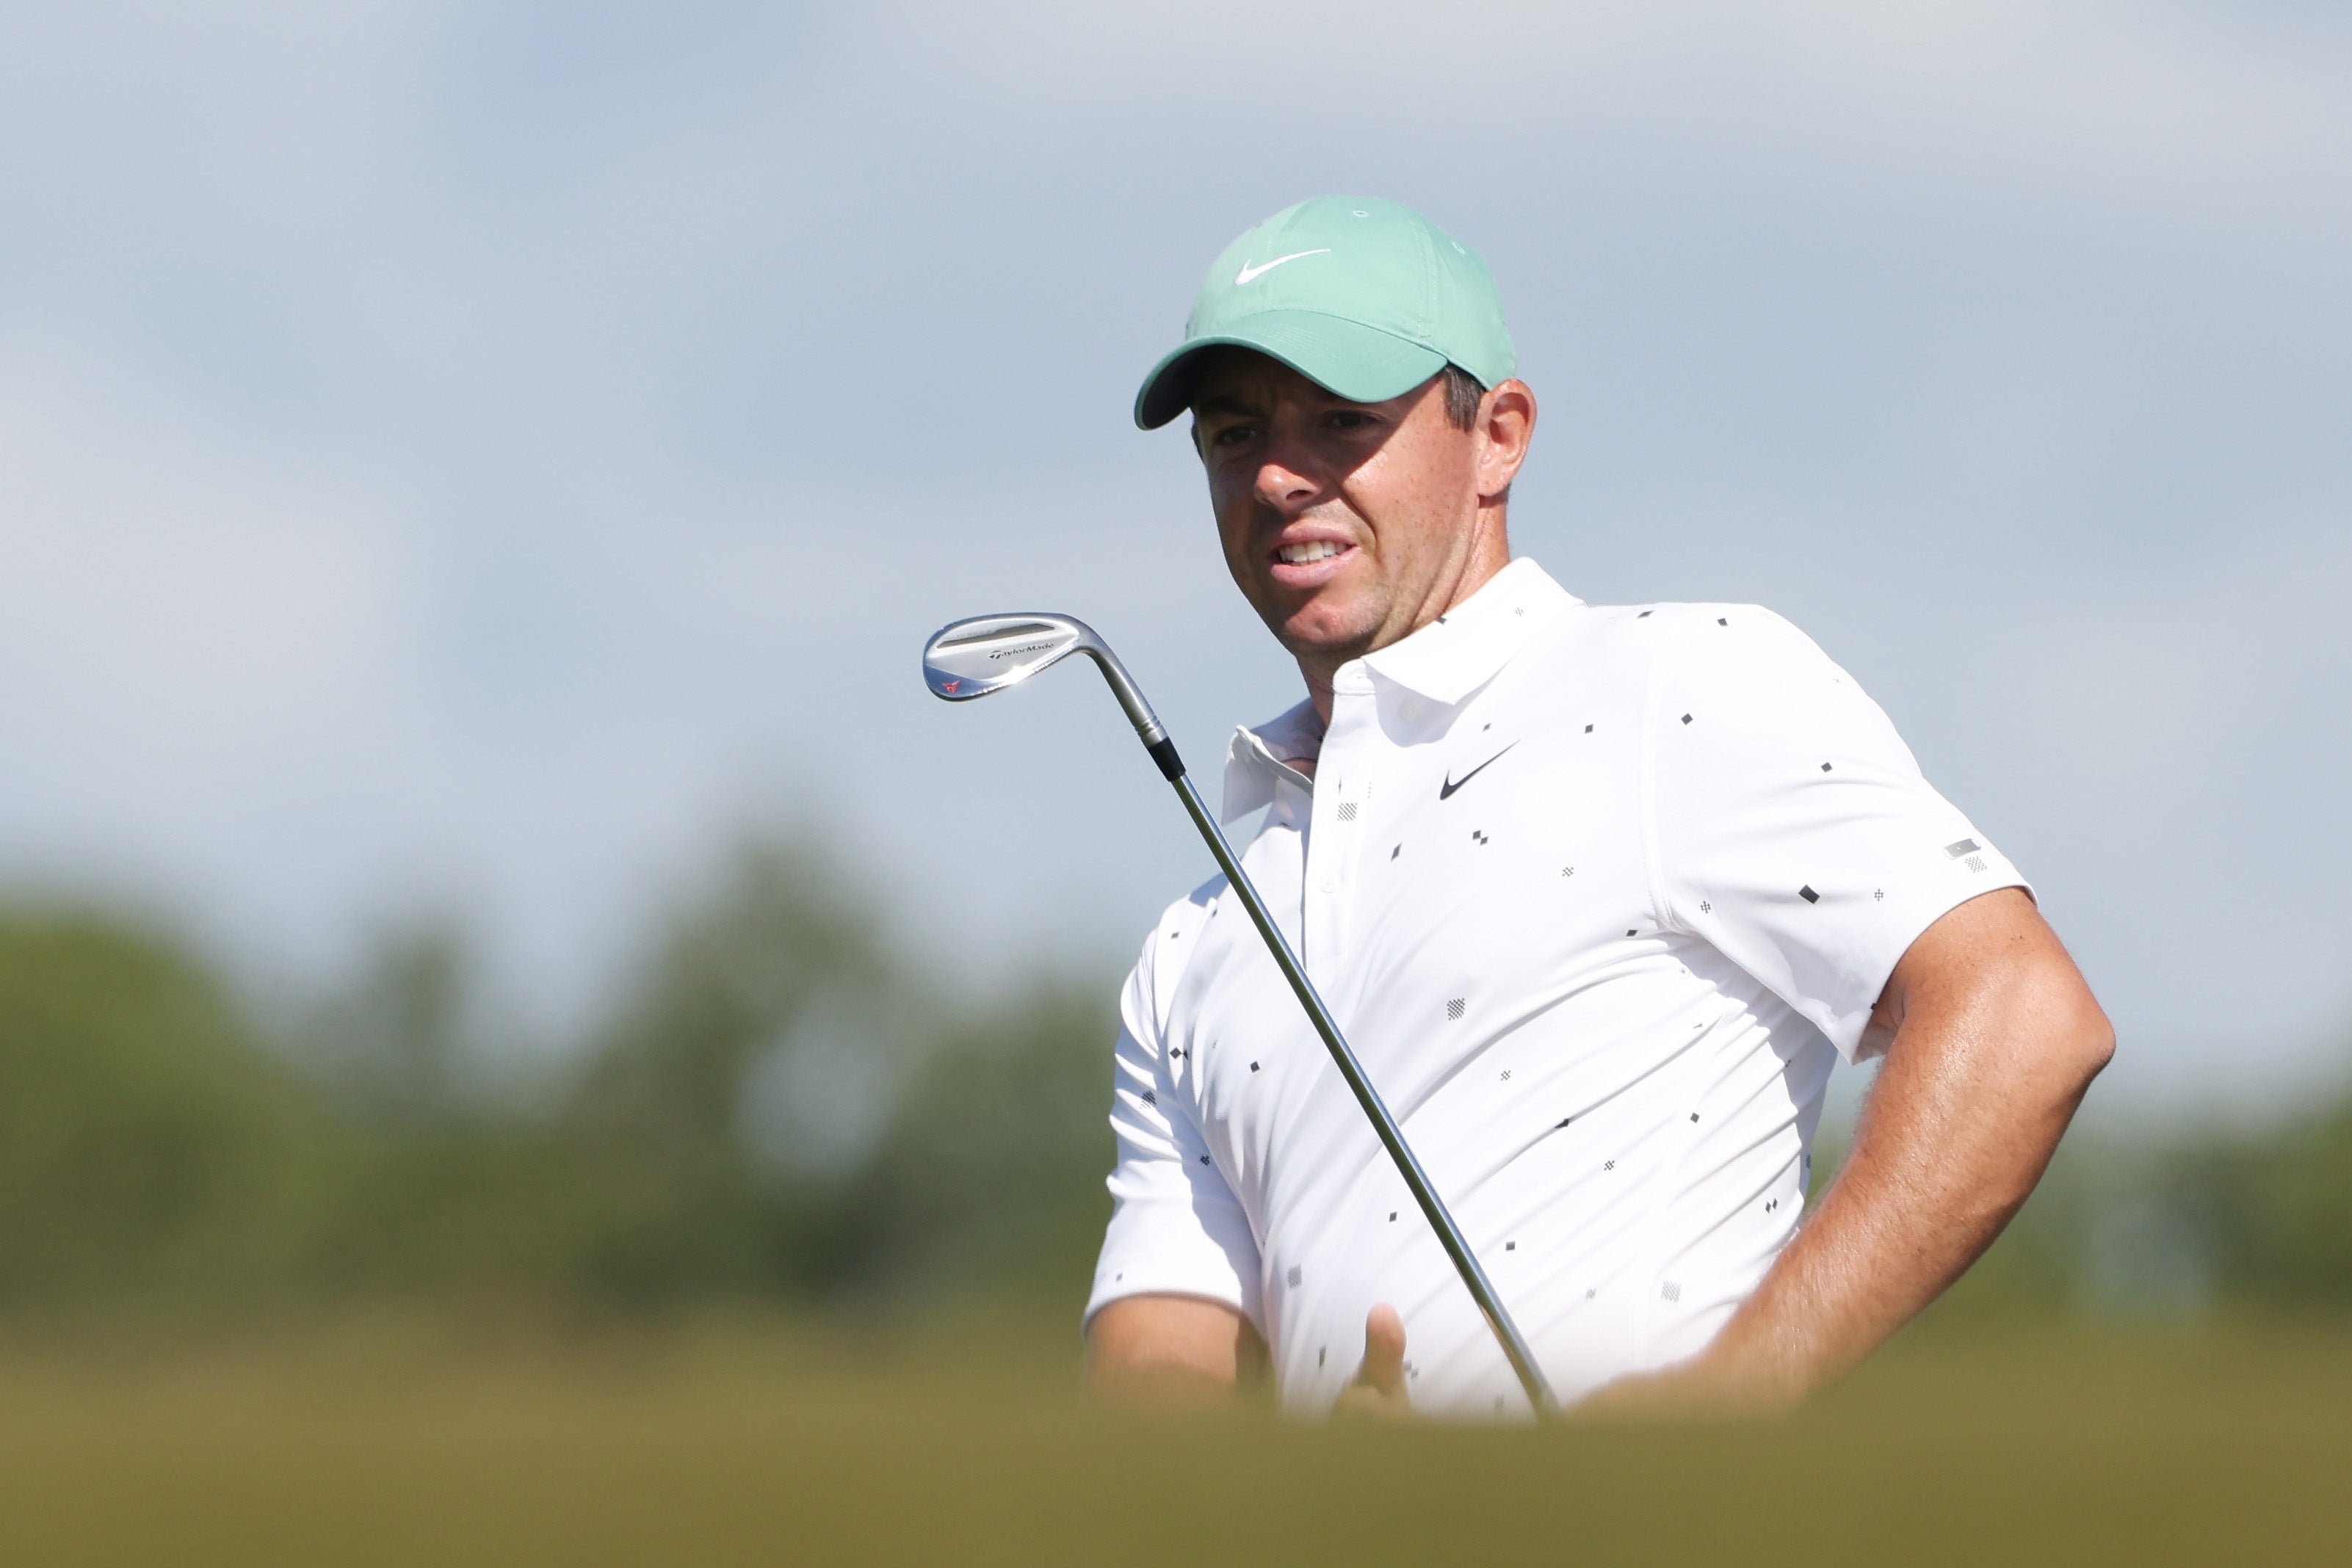 PGA Championship tee times Full second round schedule including Rory